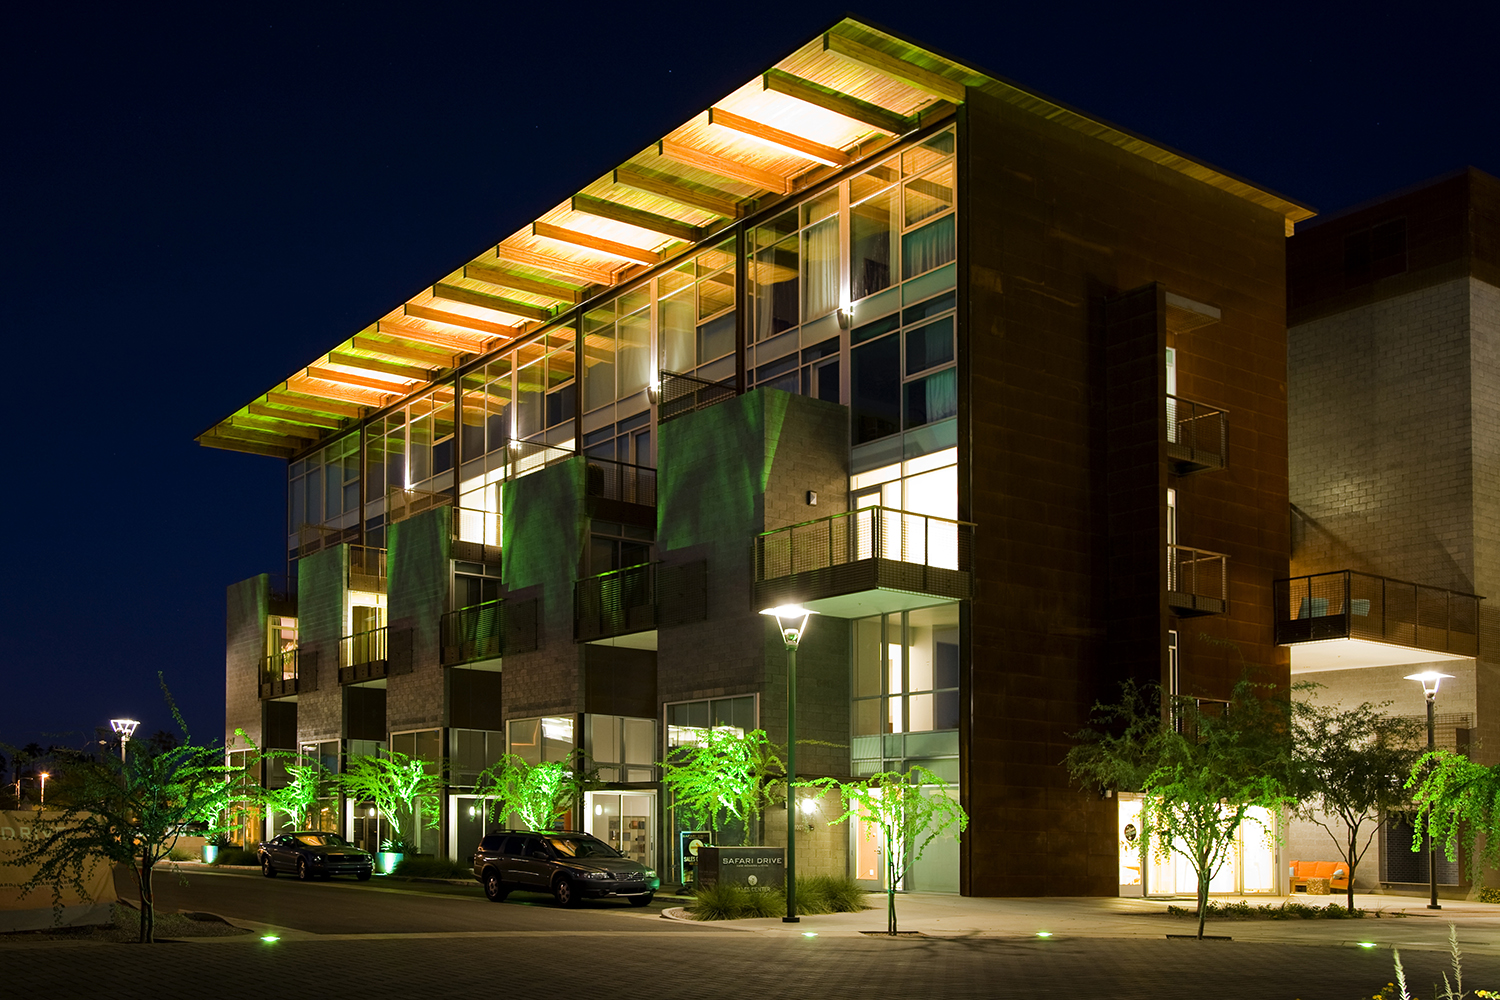 Cypress outdoor light fixtures provide soft uplight for the upper floor of a multifamily building